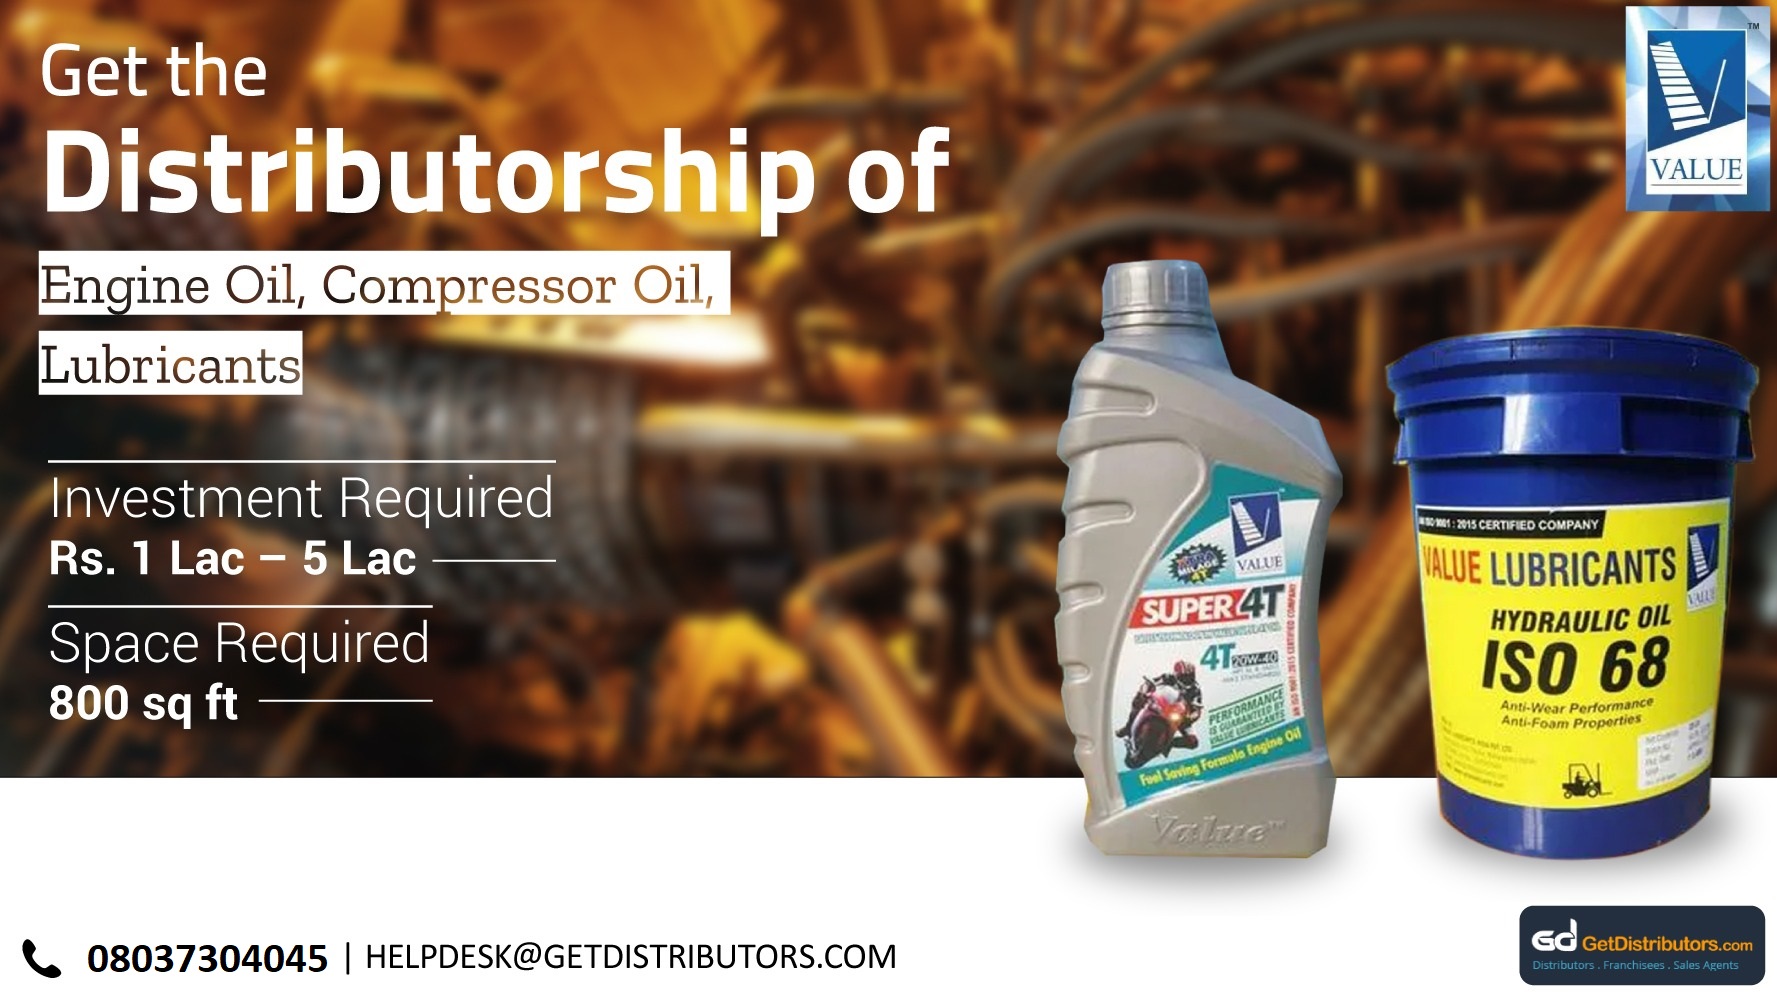 Premium quality industrial lubrication oil at affordable prices